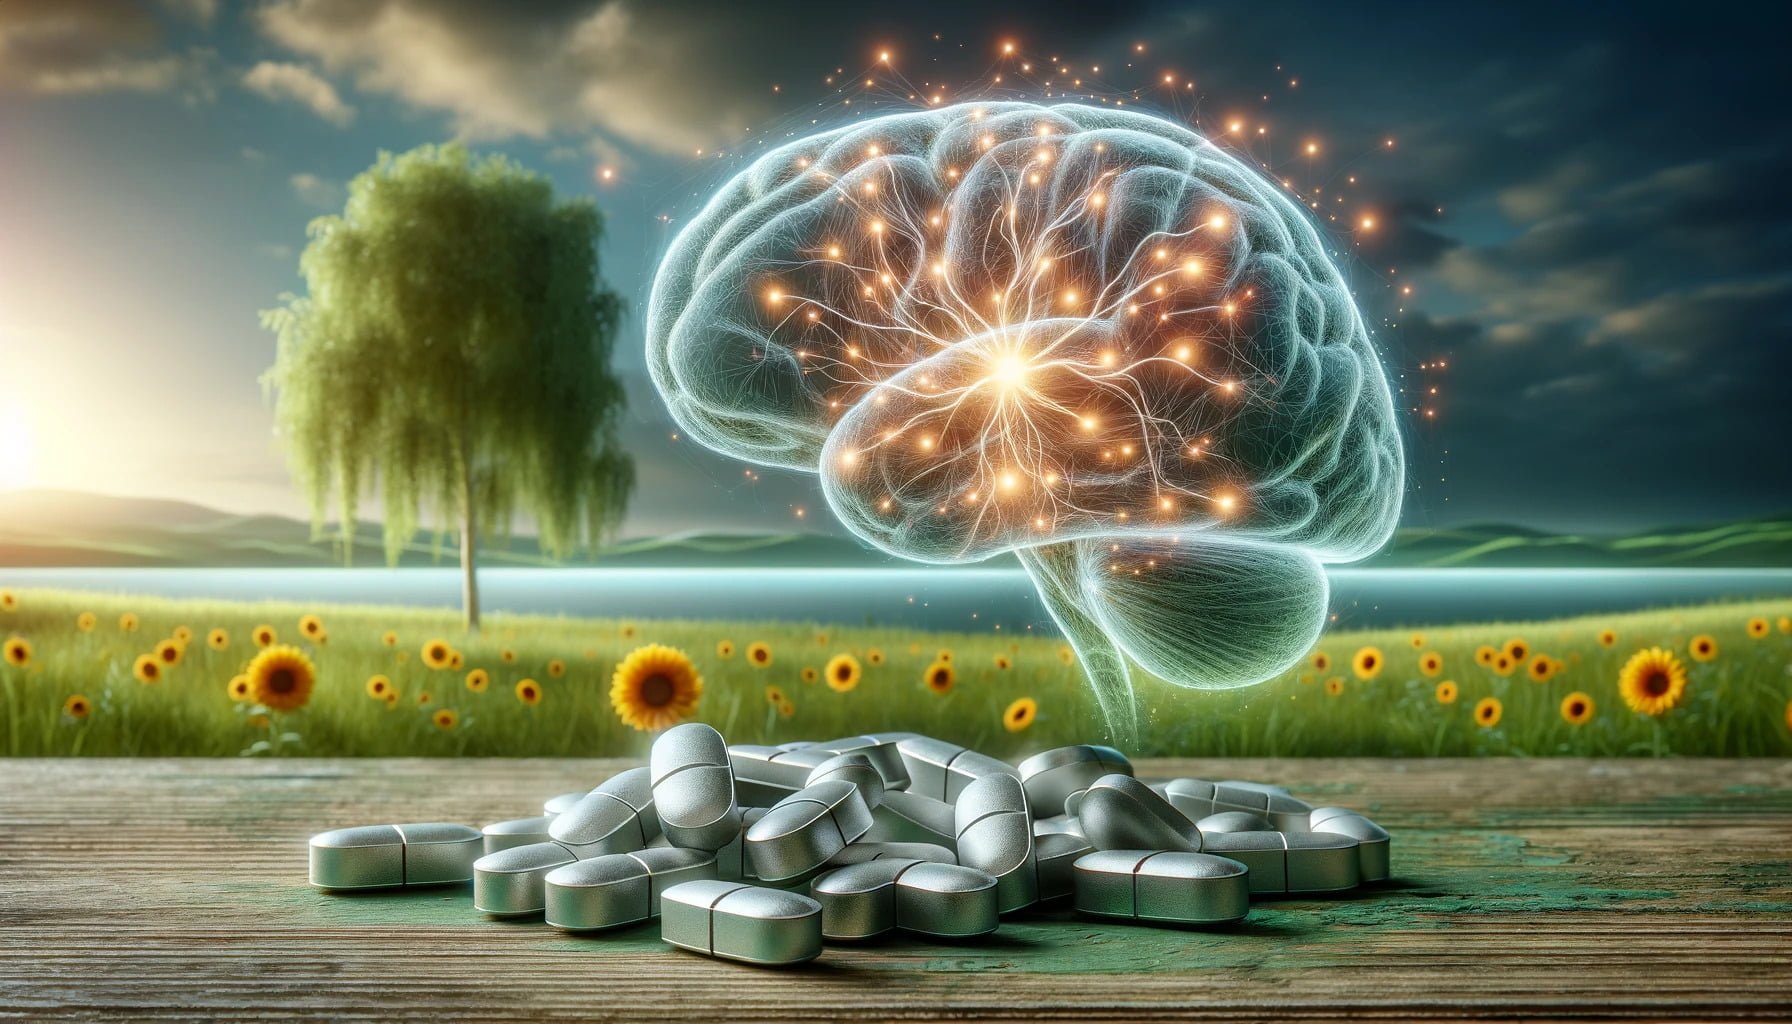 A photorealistic image of Vitamin B1 tablets, prominently displayed in a natural setting with a depiction of the nootropic effects on cognition.